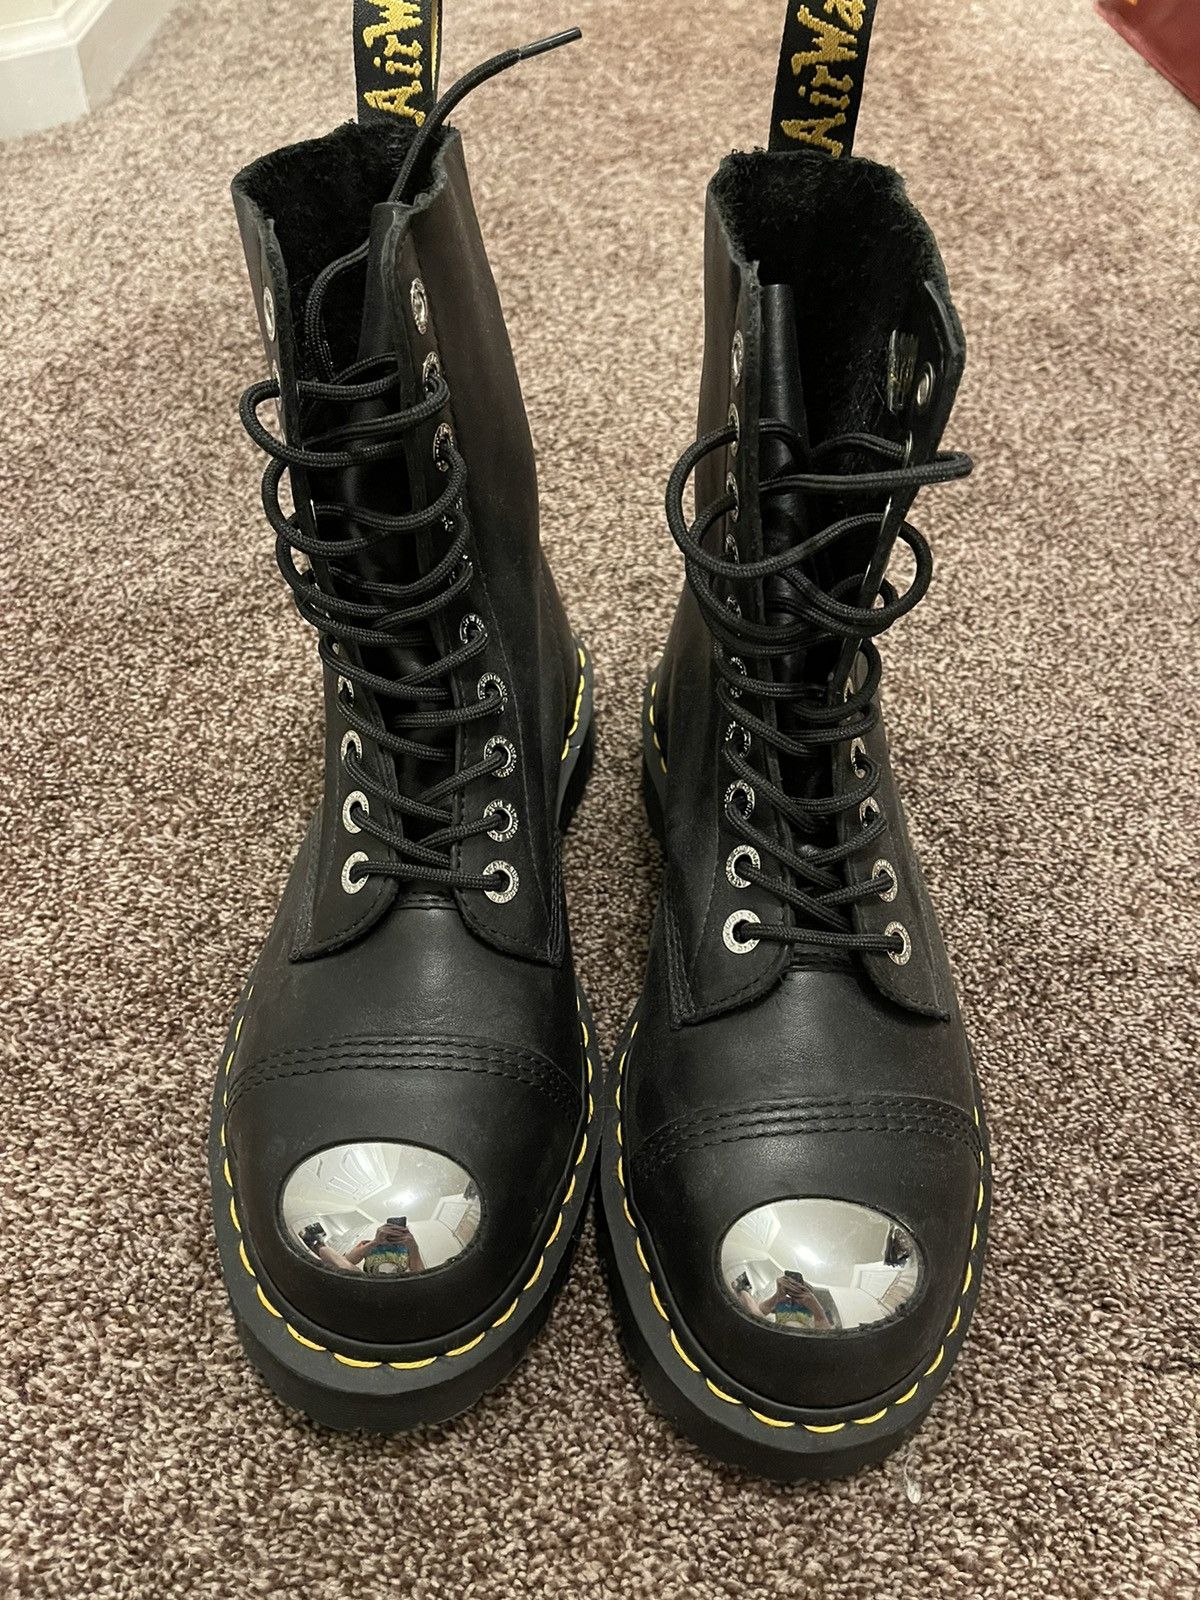 Dr. Martens Doc Martens 8761 BX exposed steel toe boot Size US 9 / EU 42 - 3 Thumbnail